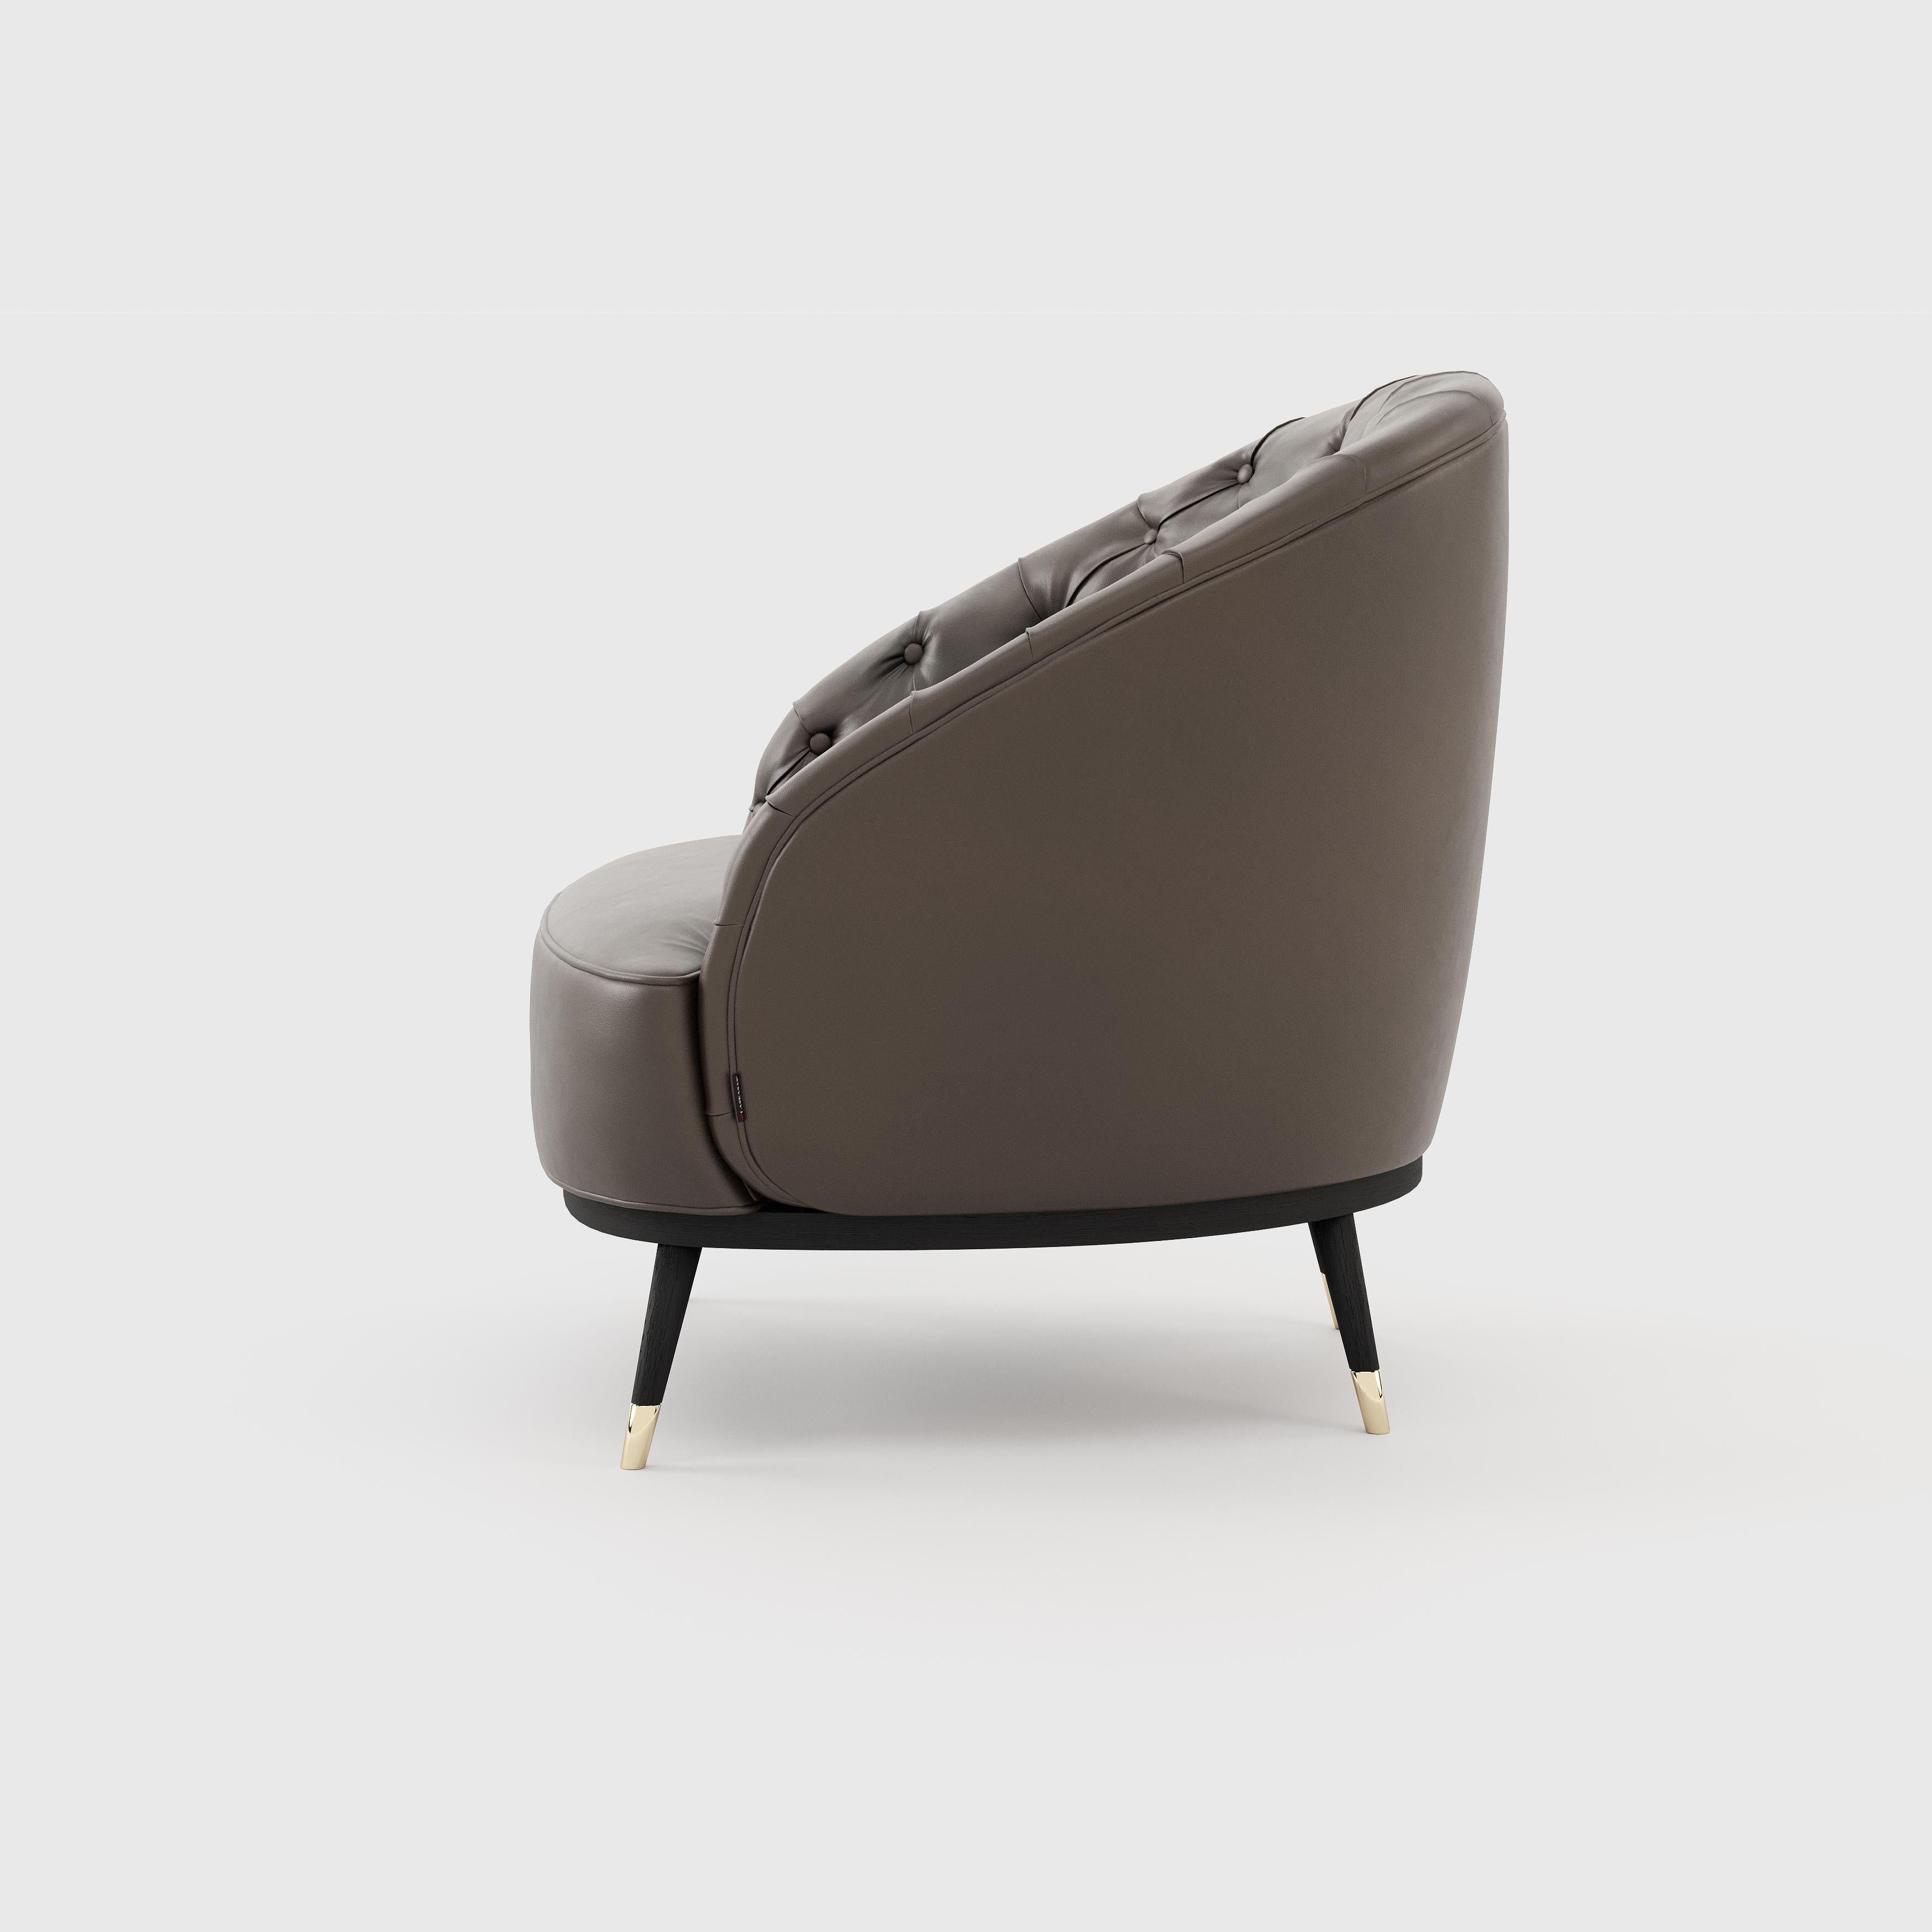 Portuguese Scandinavian design armchair fully customisable fabric and dimensions  For Sale